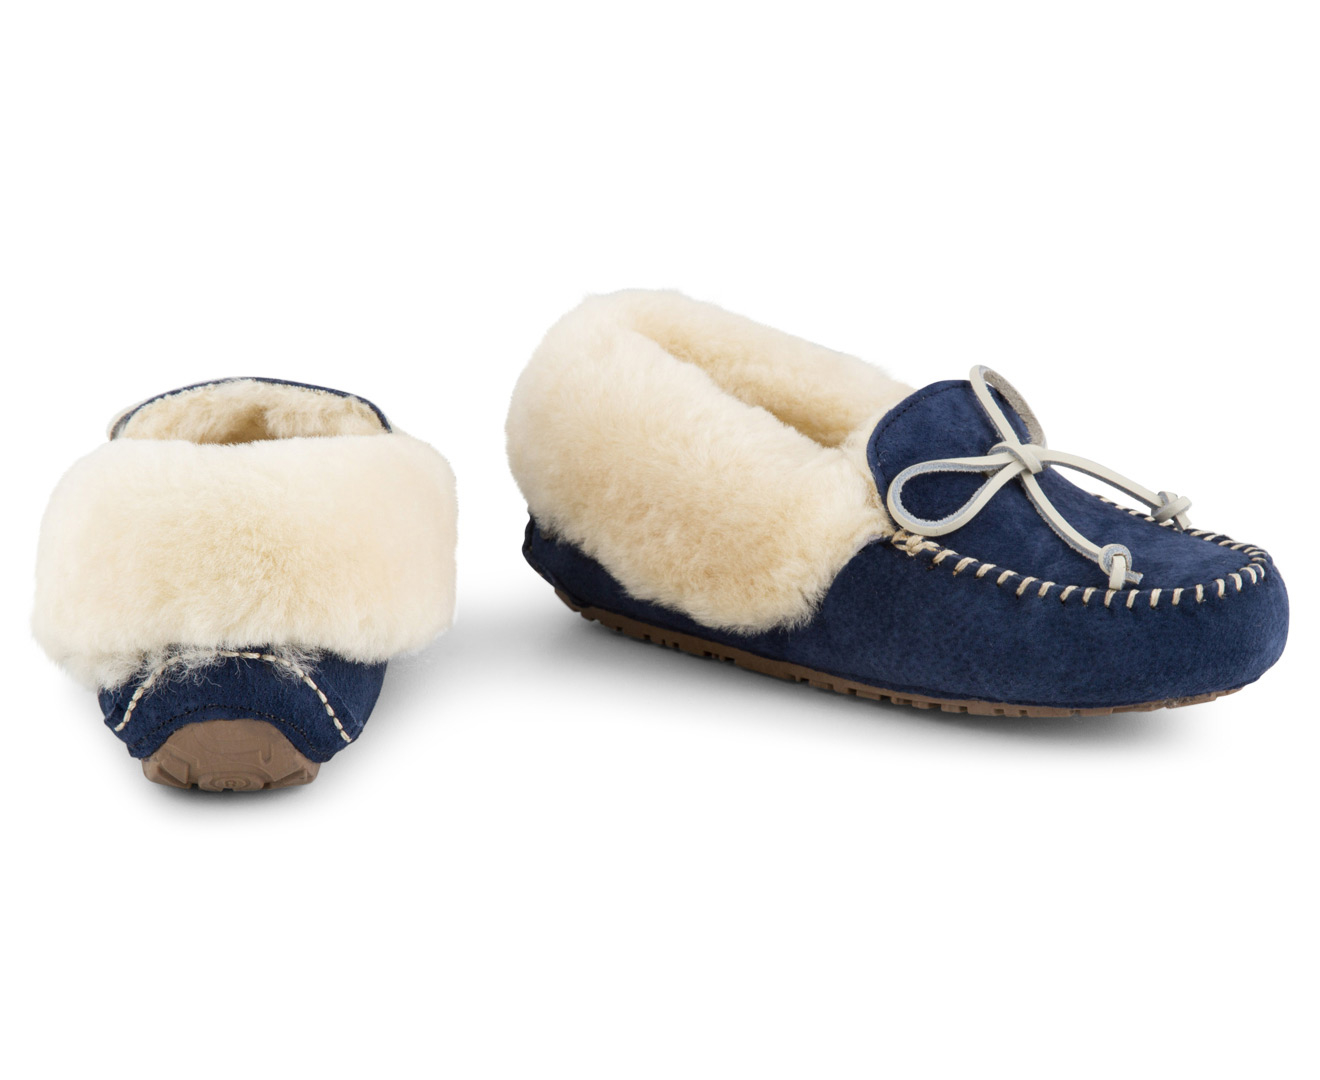 OZWEAR Connection Ugg Women's Collar Moccasin - Navy